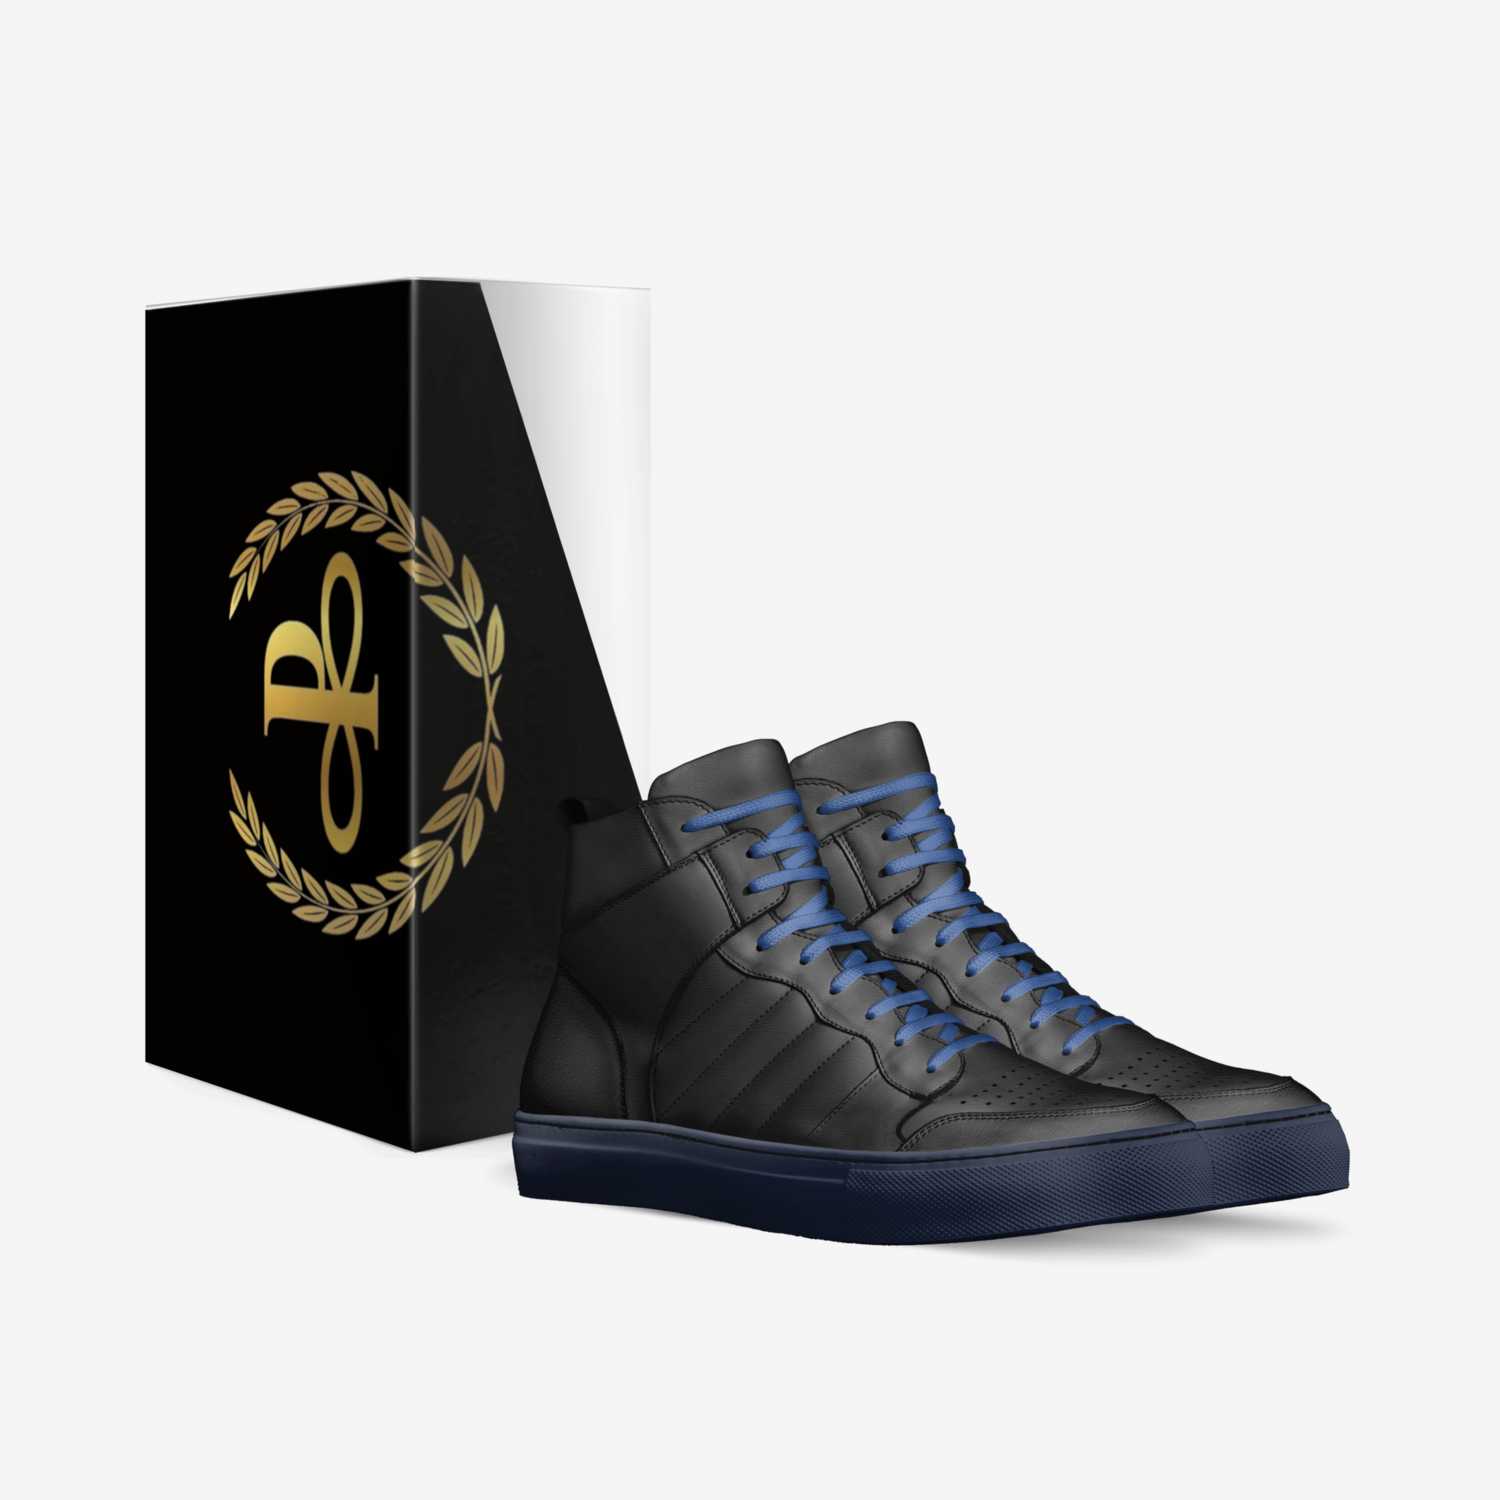 D.A.P. custom made in Italy shoes by Christopher Pasha | Box view